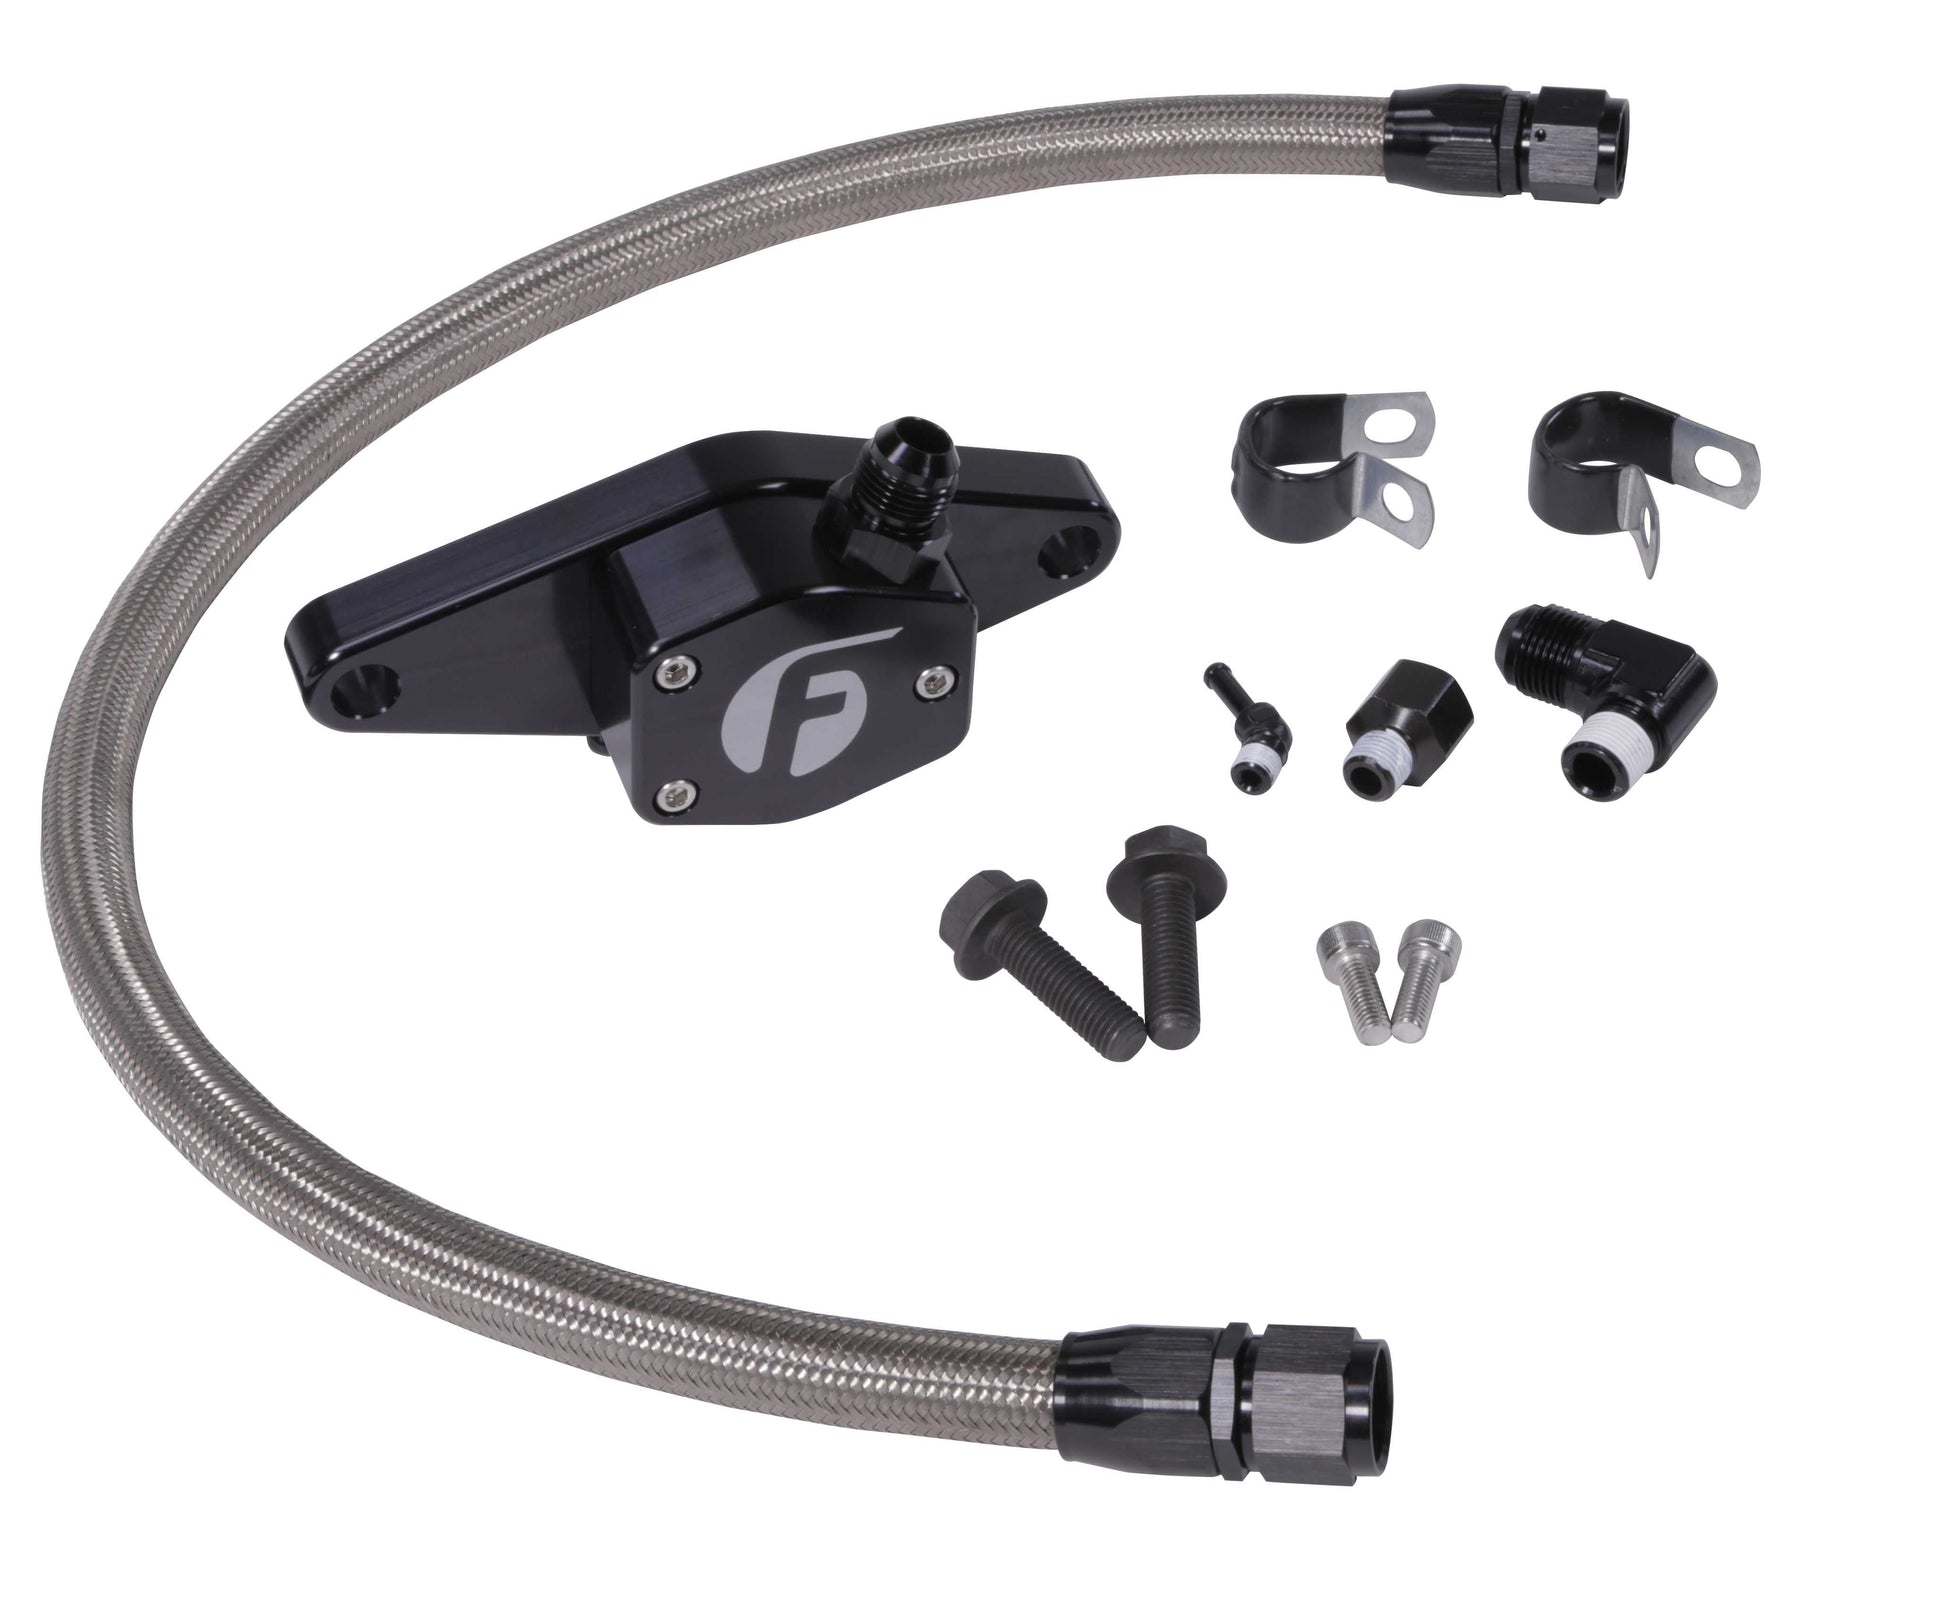 FPE-CLNTBYPS-CUMMINS-12V-SS Fleece Cummins Coolant Bypass Kit 12V (1994-1998) w/ Stainless Steel Braided Line Hell On Wheels Canada